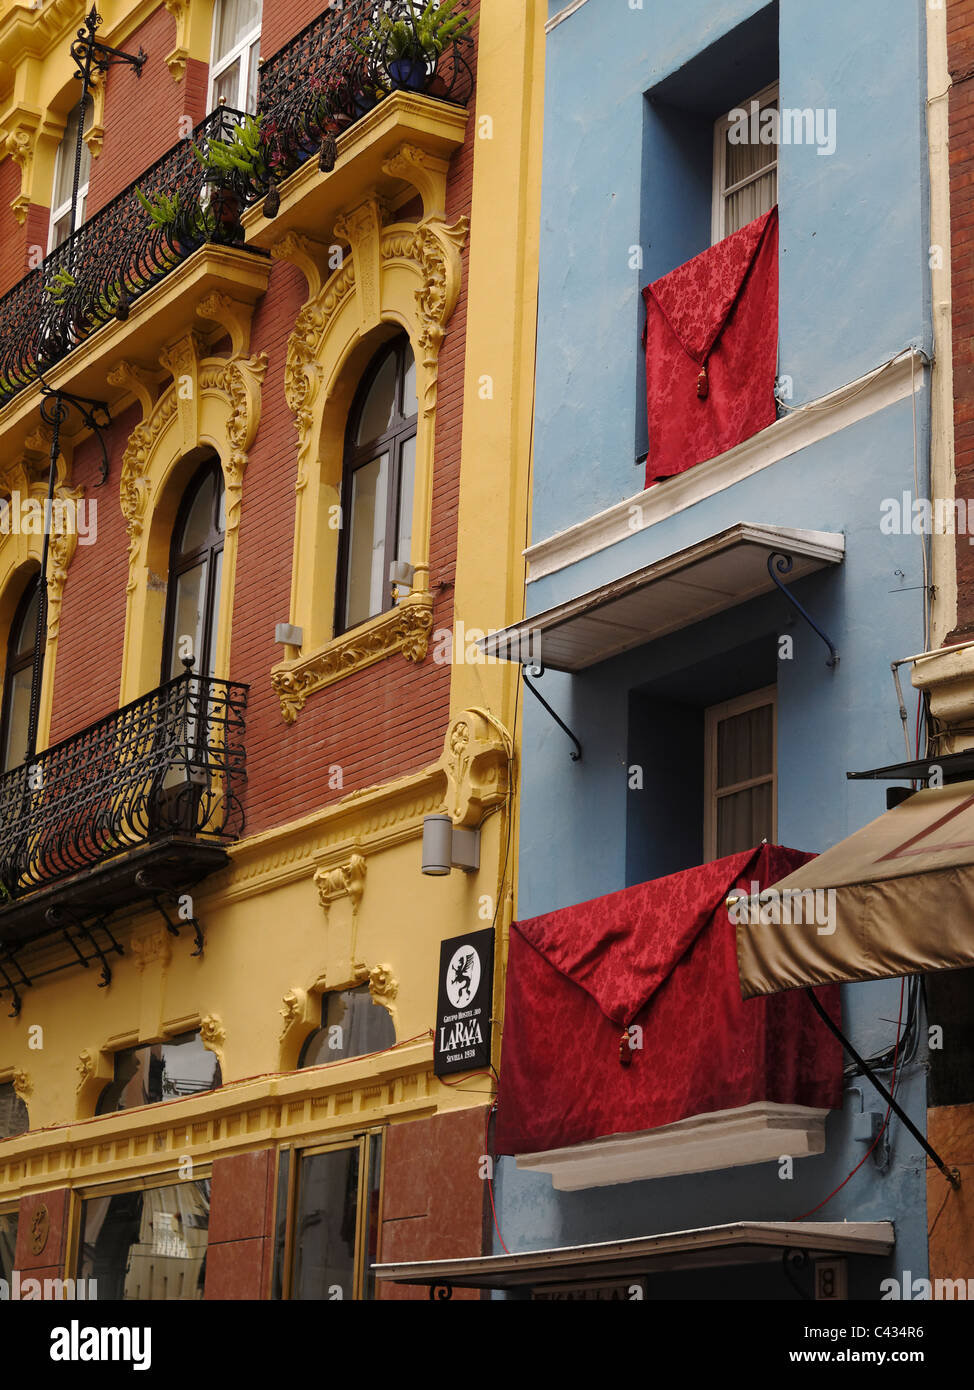 Balconies decorated for the Holy Week (Semana Santa) processions, Plaza del Salvador, Seville, Spain. Stock Photo